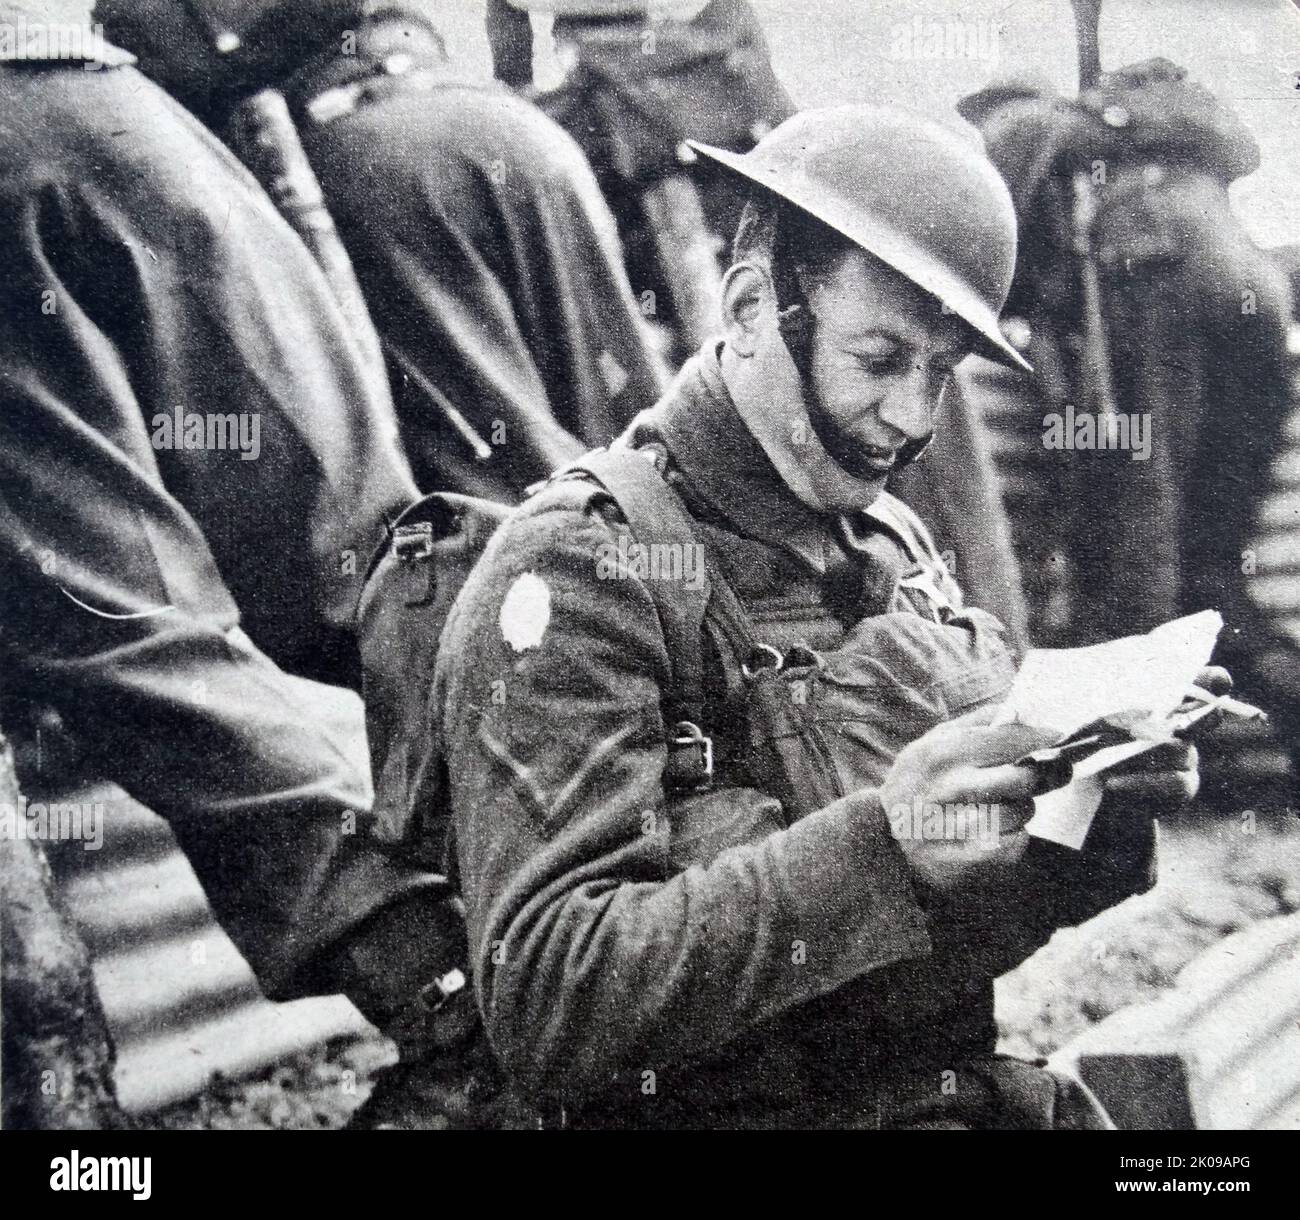 Lance Corporal Batten in Turcoing, France, opening his mail from home in 1939. Stock Photo